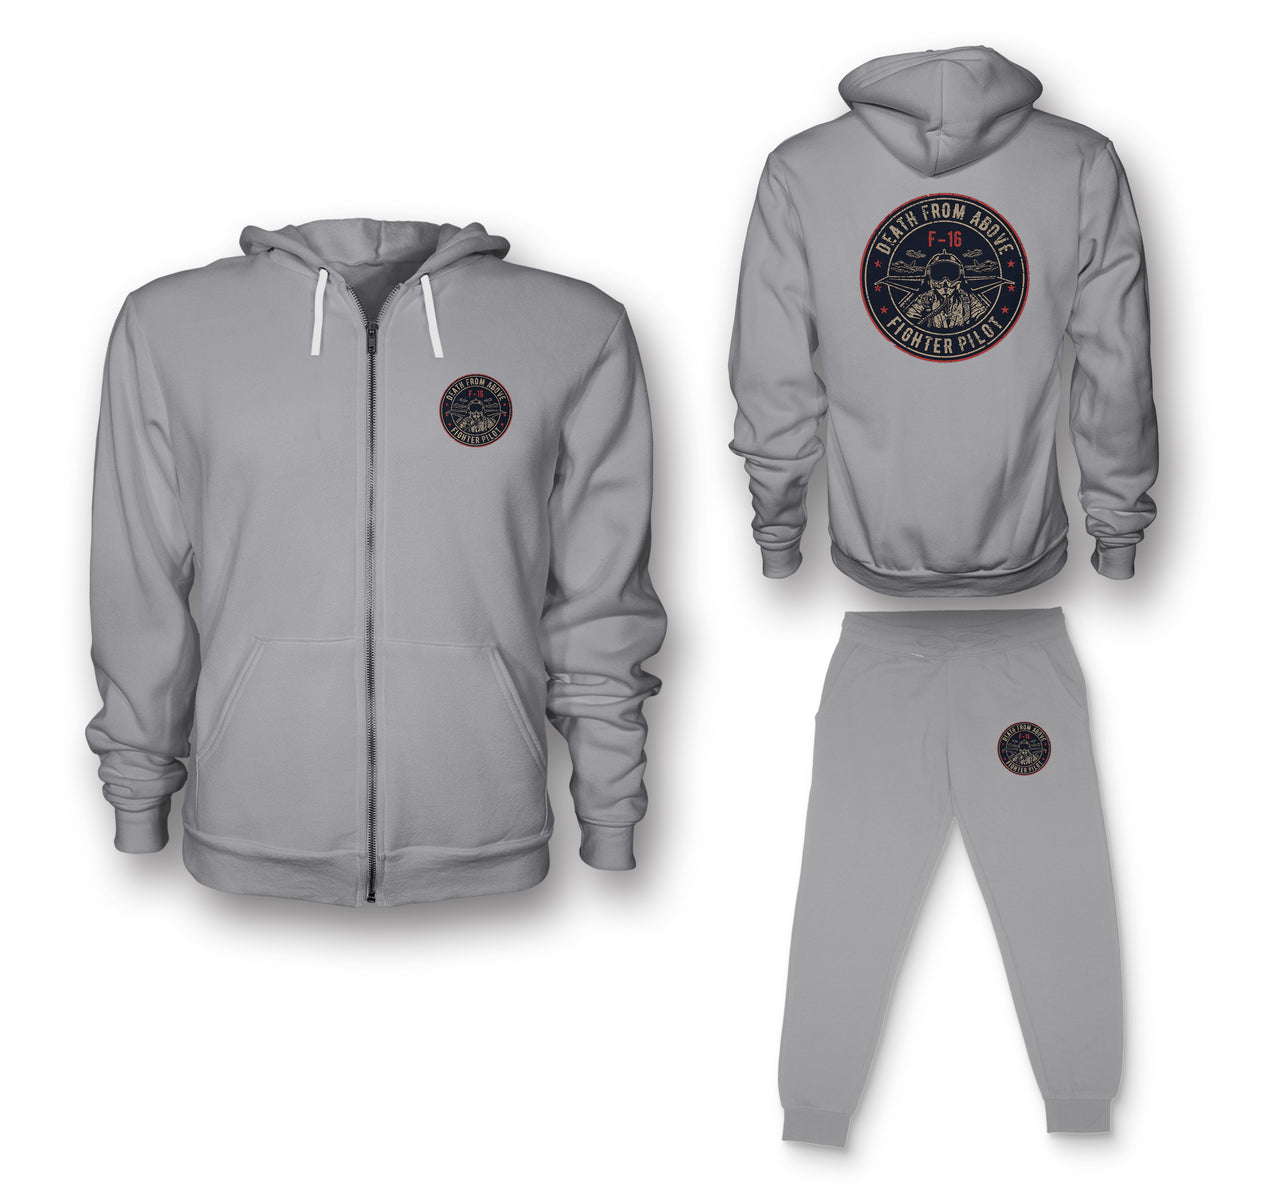 Fighting Falcon F16 - Death From Above Designed Zipped Hoodies & Sweatpants Set